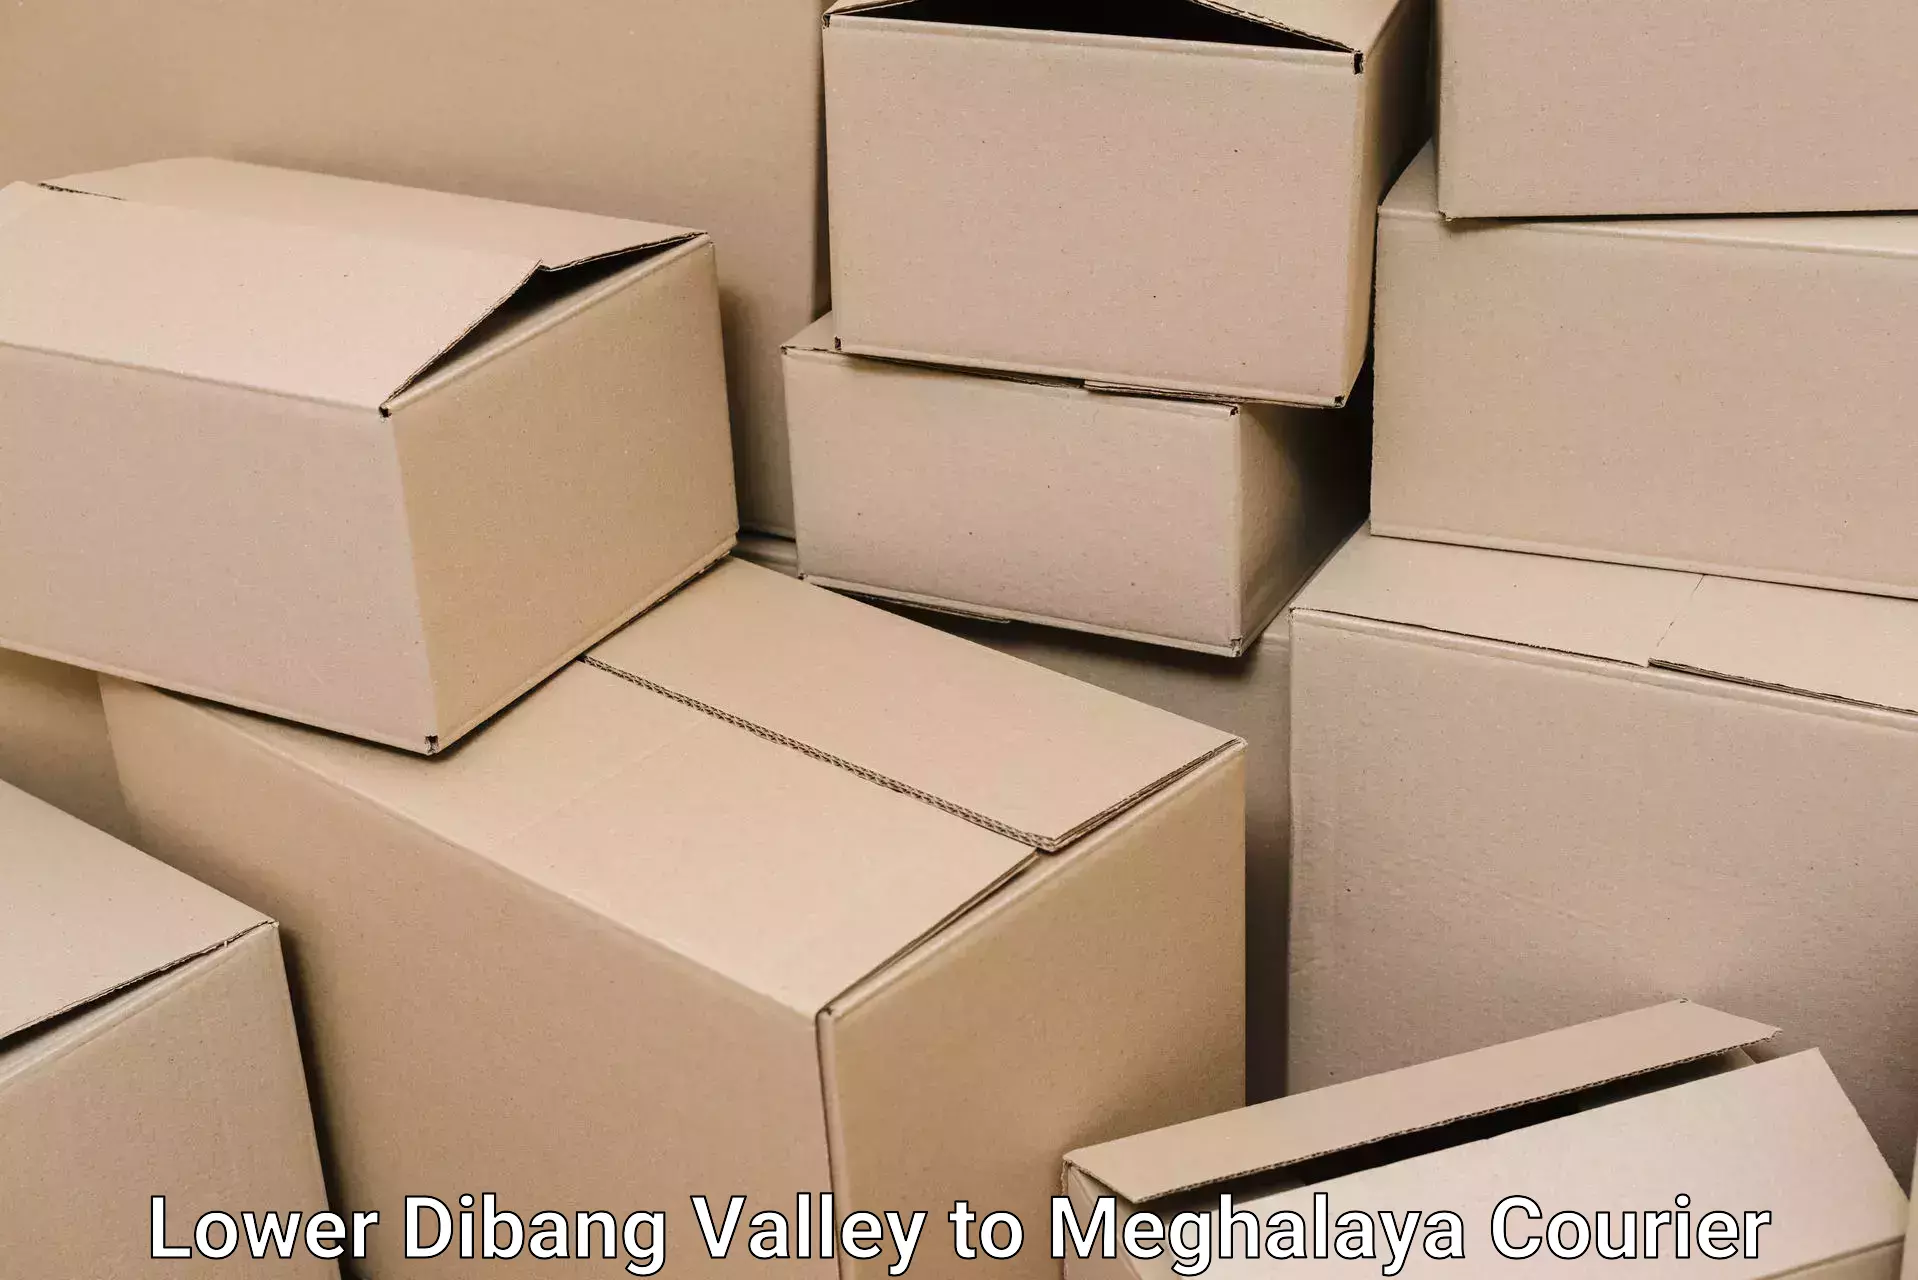 Efficient moving company Lower Dibang Valley to Meghalaya